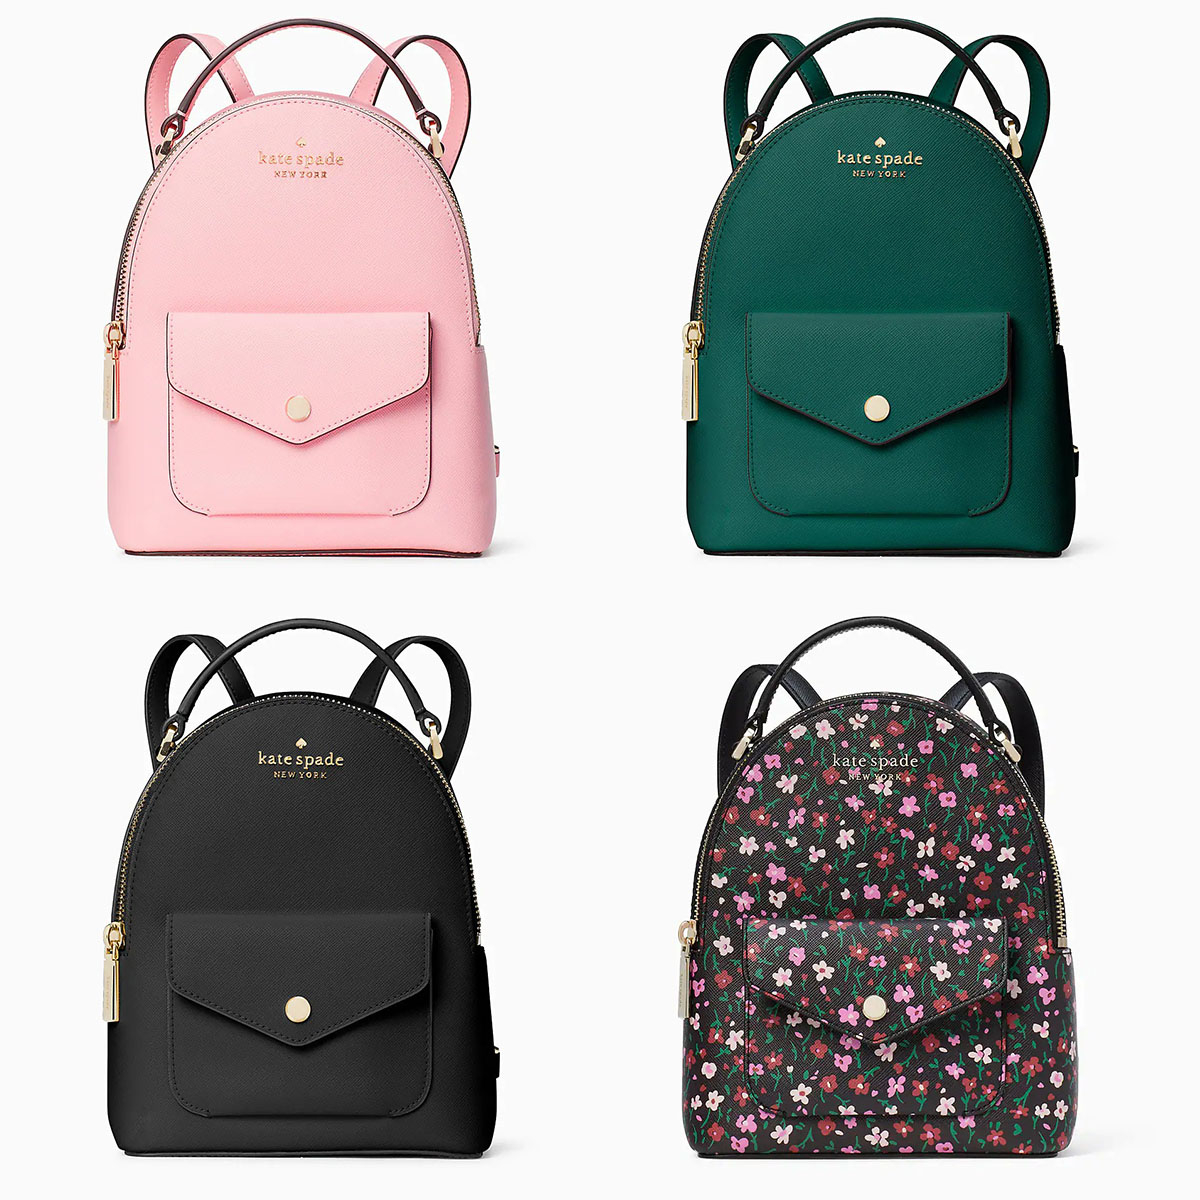 Kate Spade Deal of the Day: Save $210 on This Mini Backpack